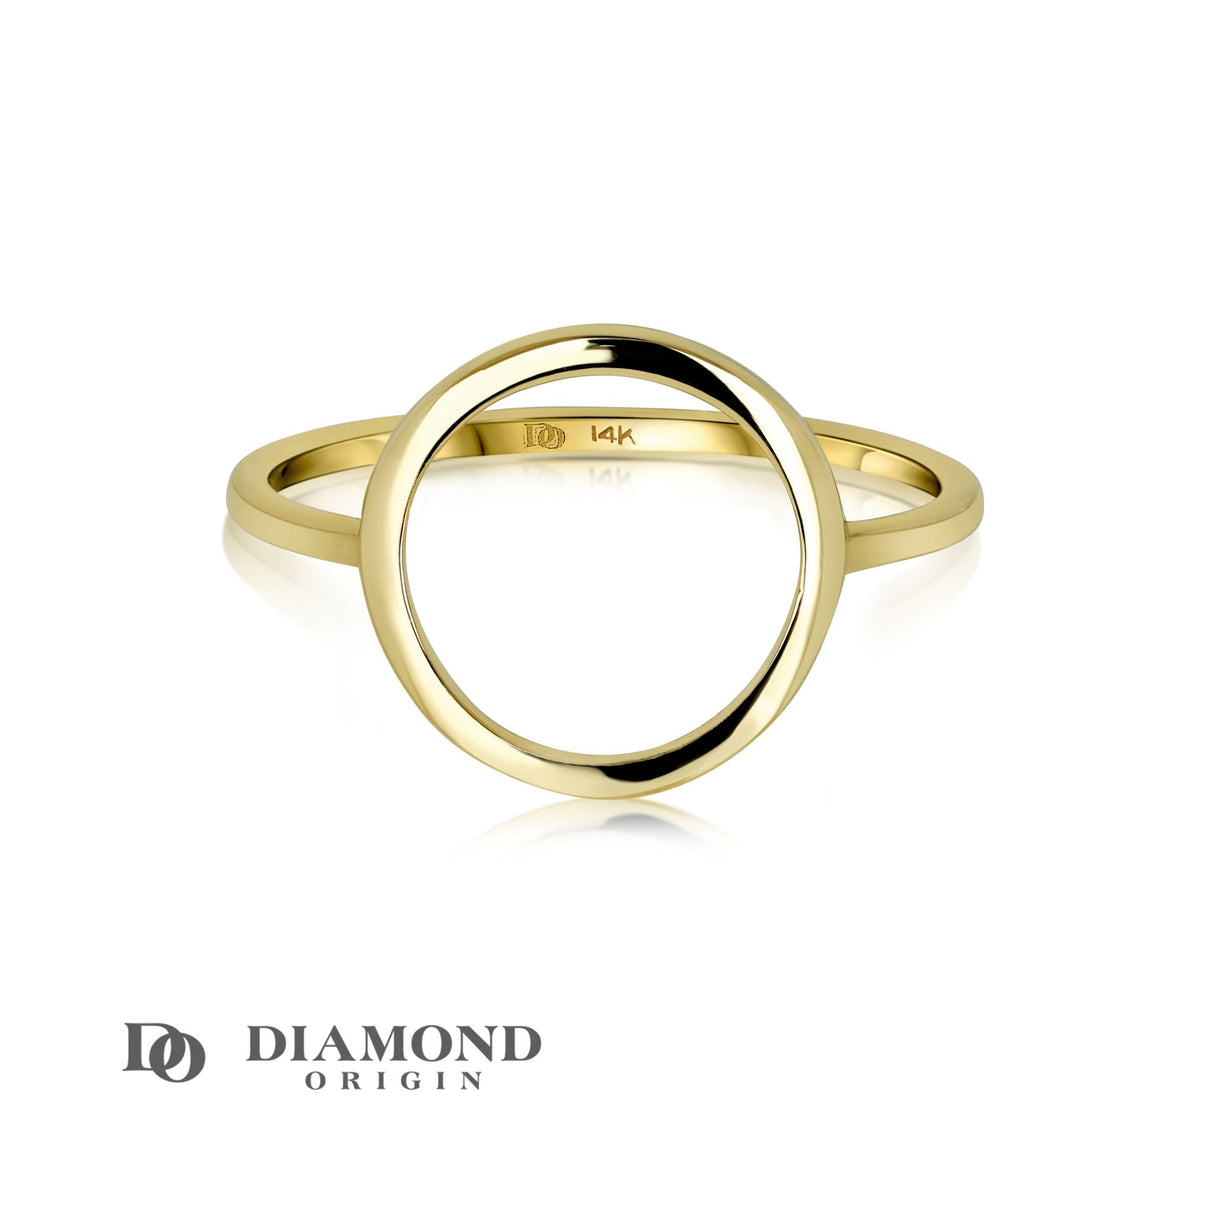 The 14K Gold Open Circle Stackable Ring by Diamond Origin is a testament to contemporary elegance, superior craftsmanship, and timeless design. This uniquely designed ring encapsulates the brand's commitment to creating exquisite jewelry that speaks of sophistication and quality.